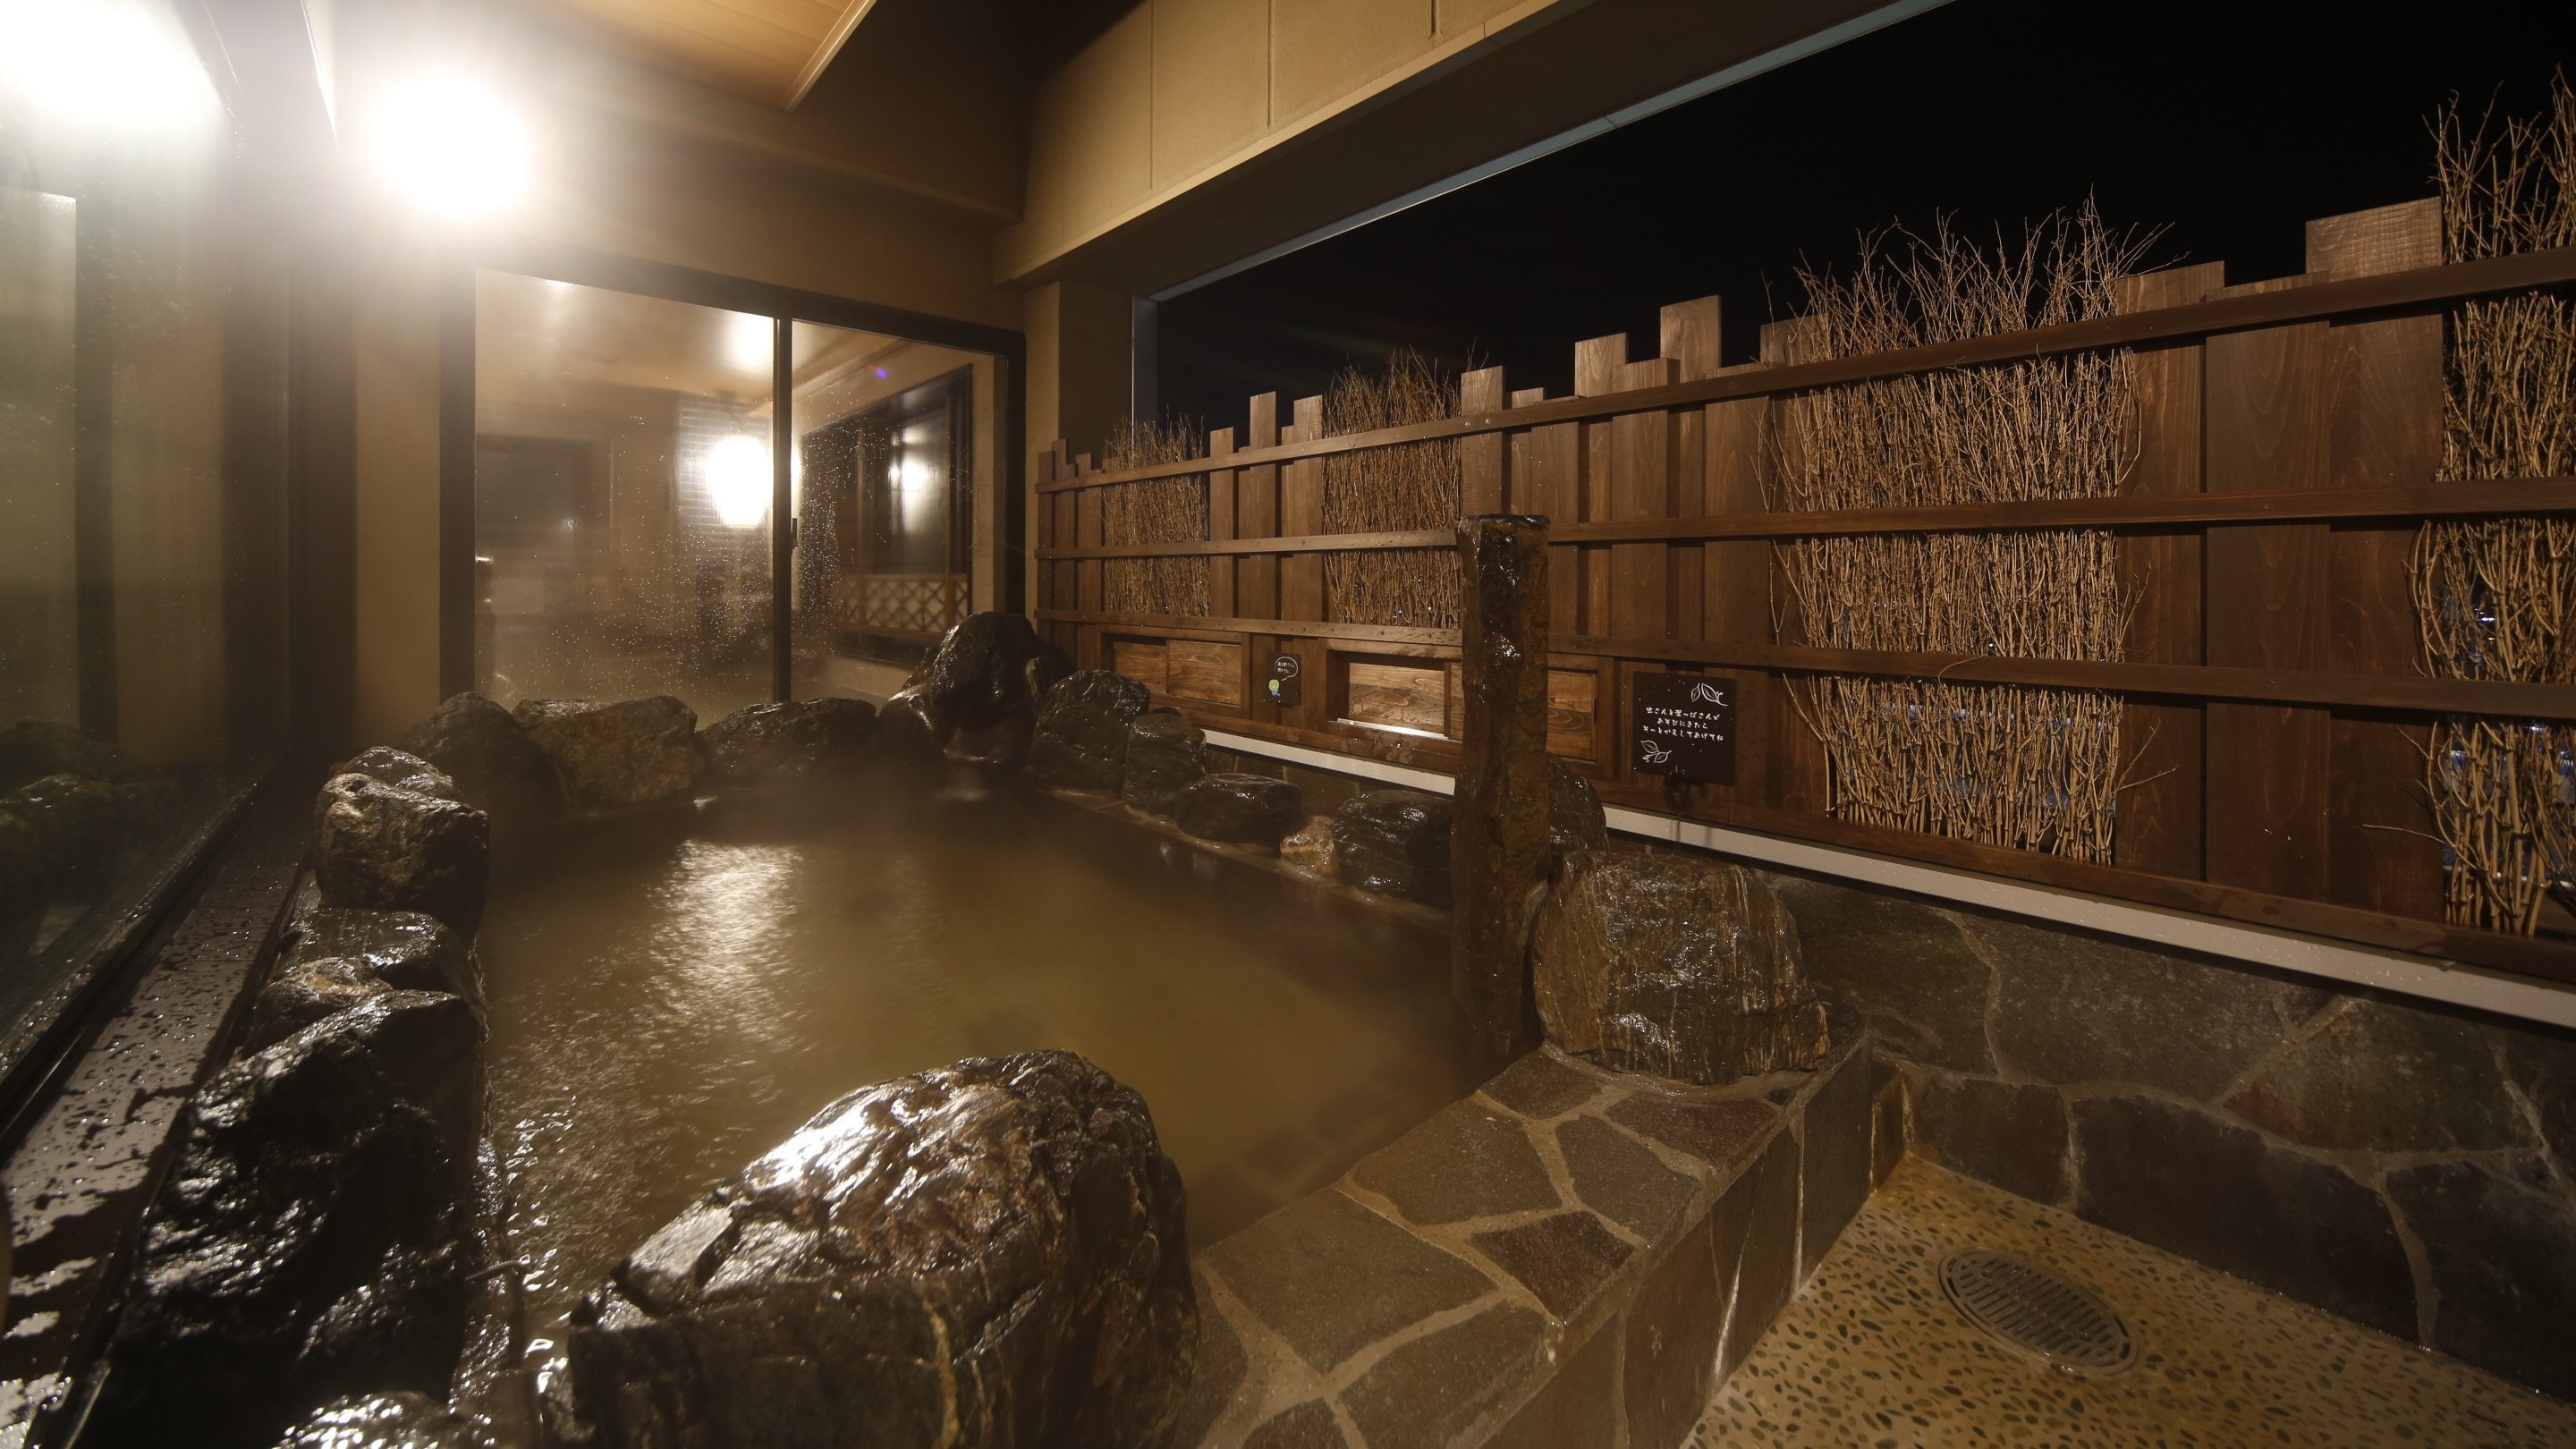 ◆ Men's large communal bath ≪Natural hot spring southern hot spring≫ Open-air bath (hot water temperature: 41-42 ℃)